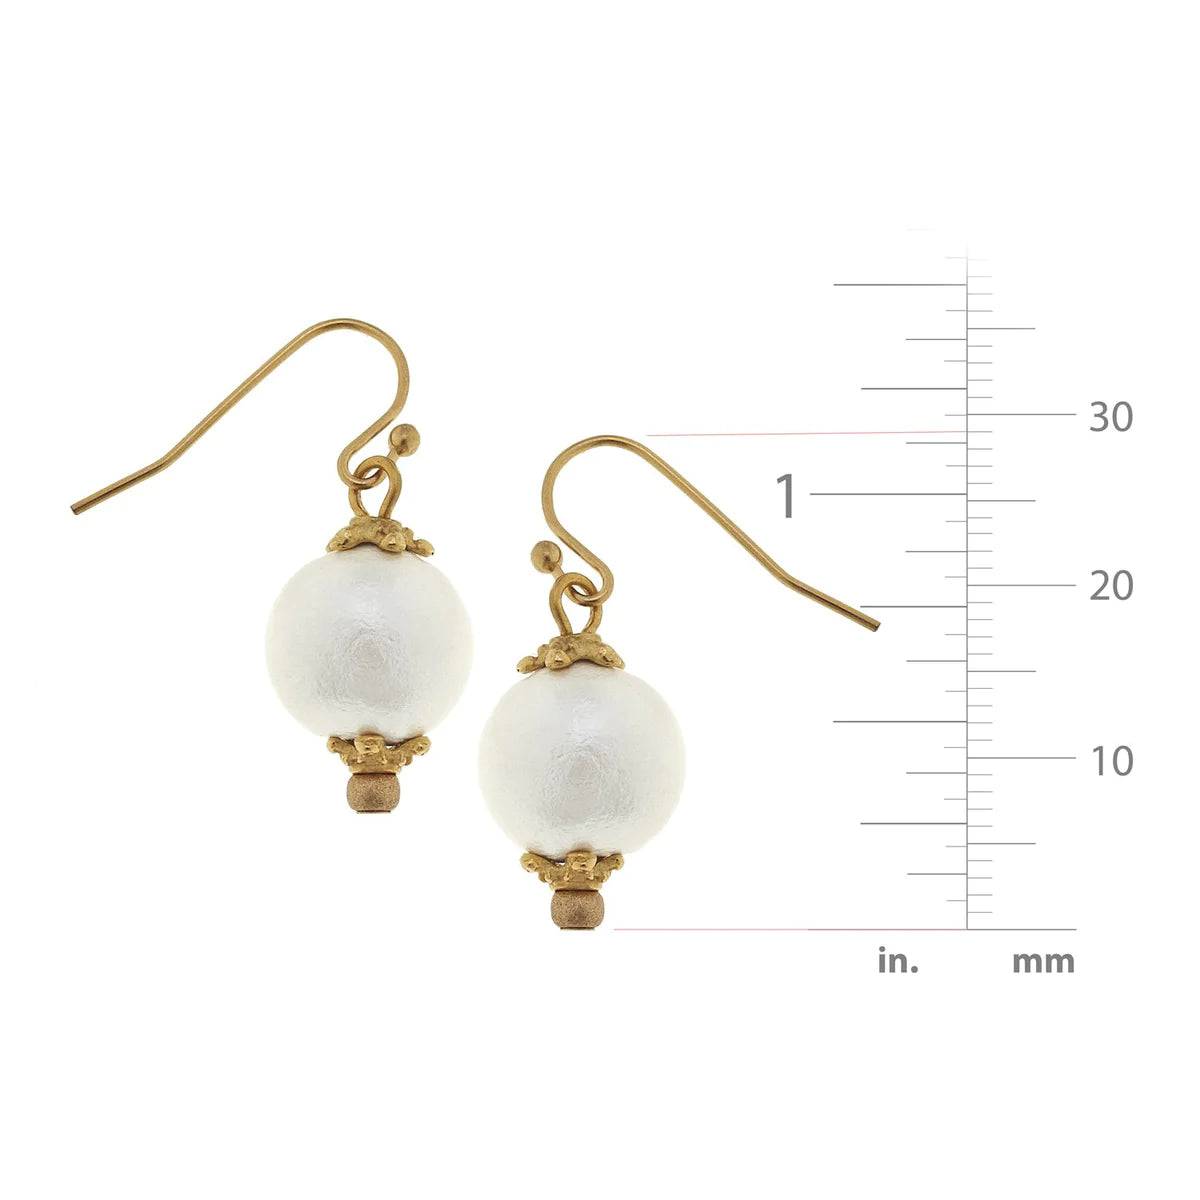 susan Shaw - Small Cotton Pearl Earrings - Findlay Rowe Designs